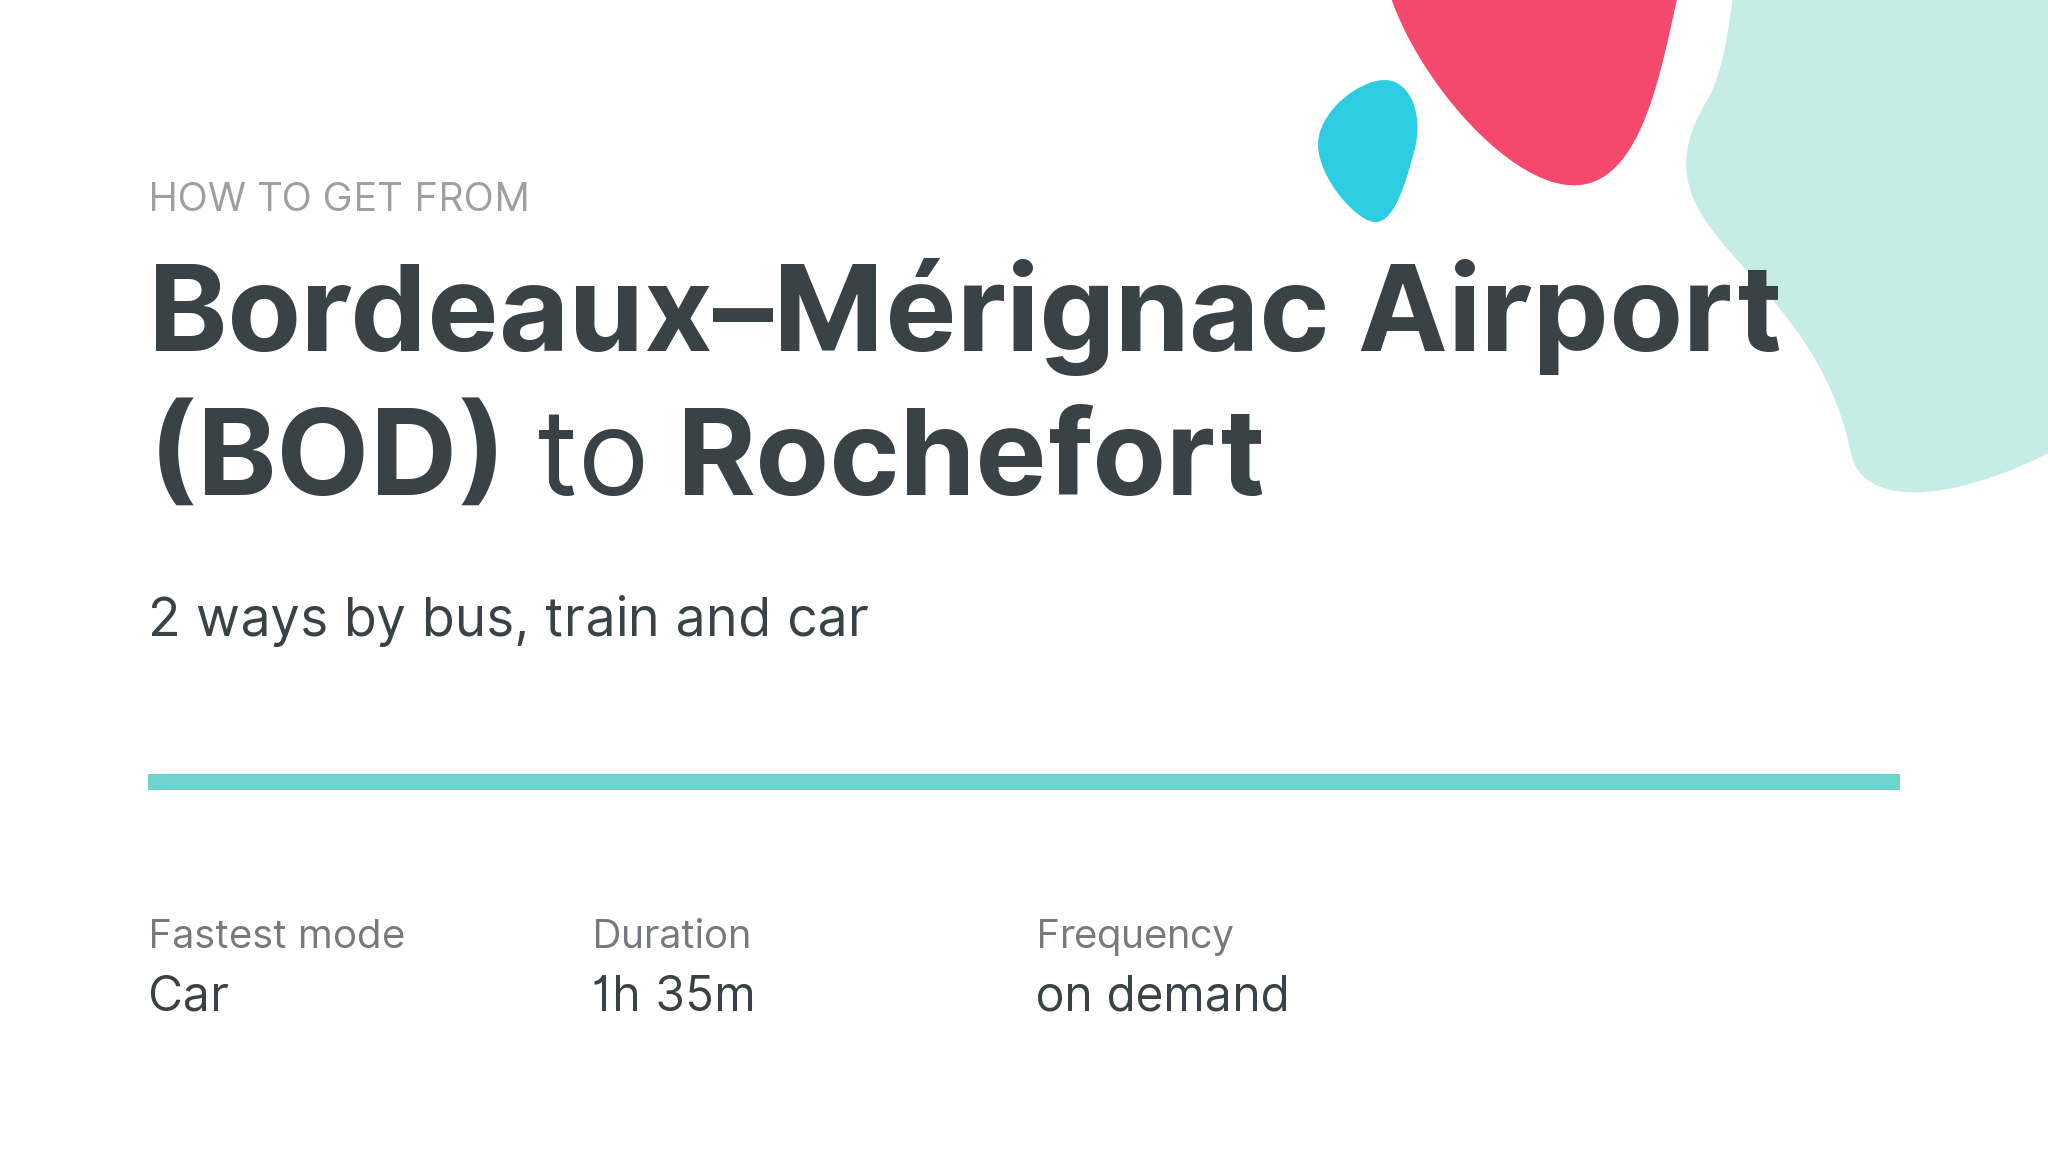 How do I get from Bordeaux–Mérignac Airport (BOD) to Rochefort